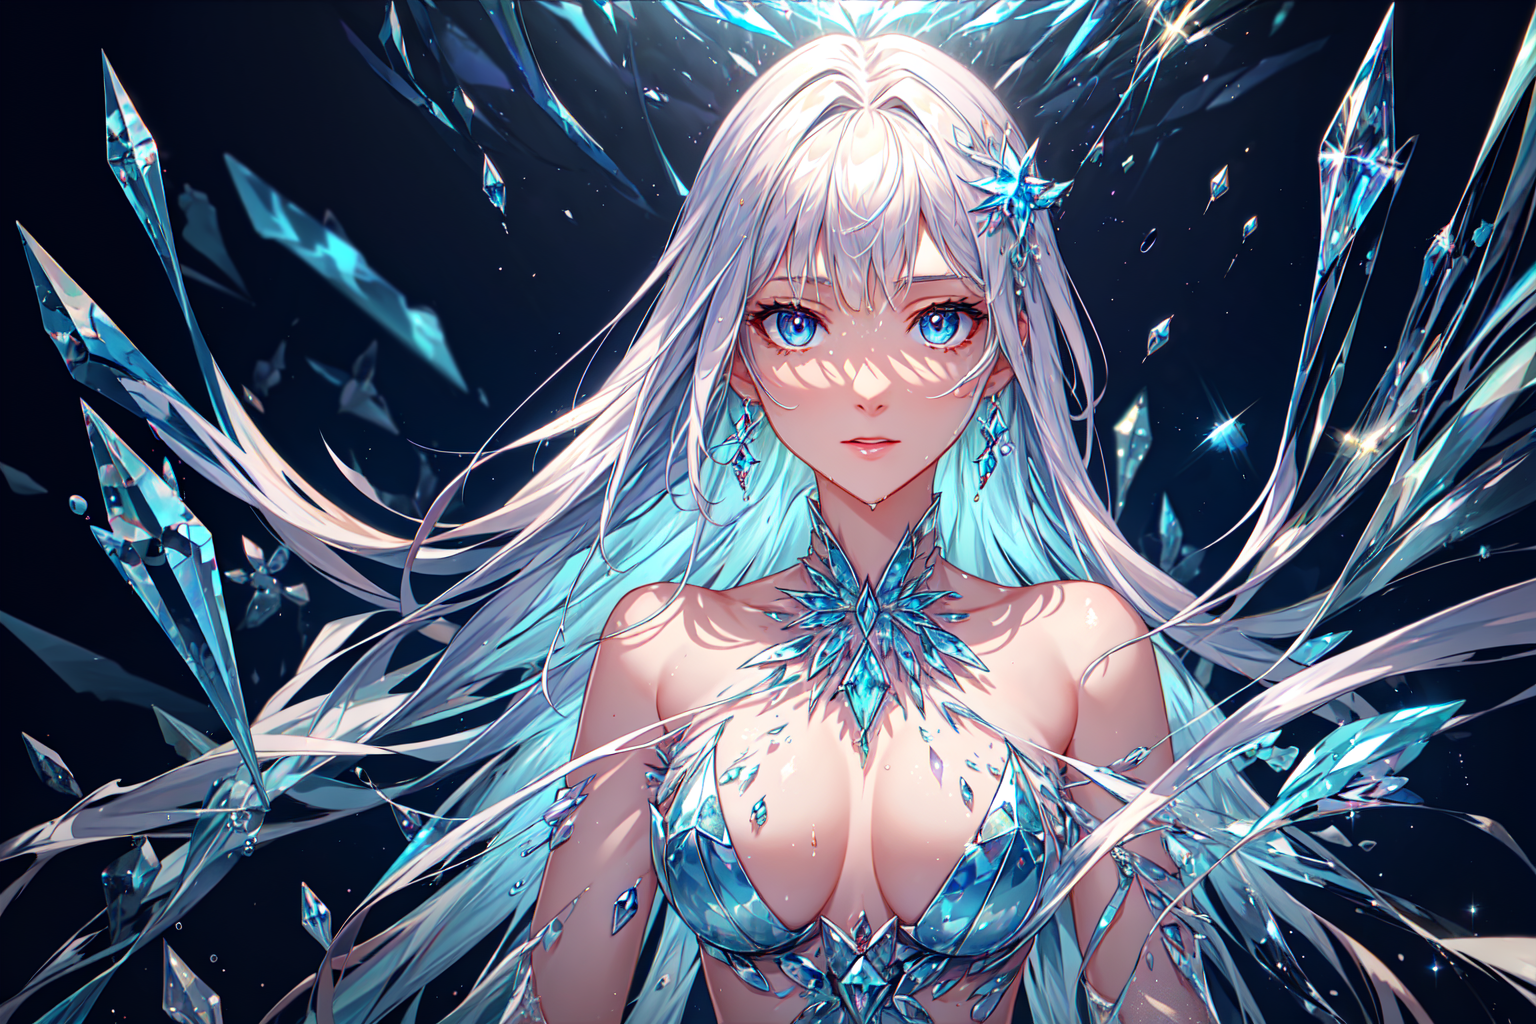 Queen of Ice Room Aesthetics Ice Princess Anime Fantasy Art Classic Poster  Sexy Girl with Big Breasts in Suspenders Poster Decorative Painting Canvas  Wall Art Living Room Posters Bedroom : Amazon.ca: Home